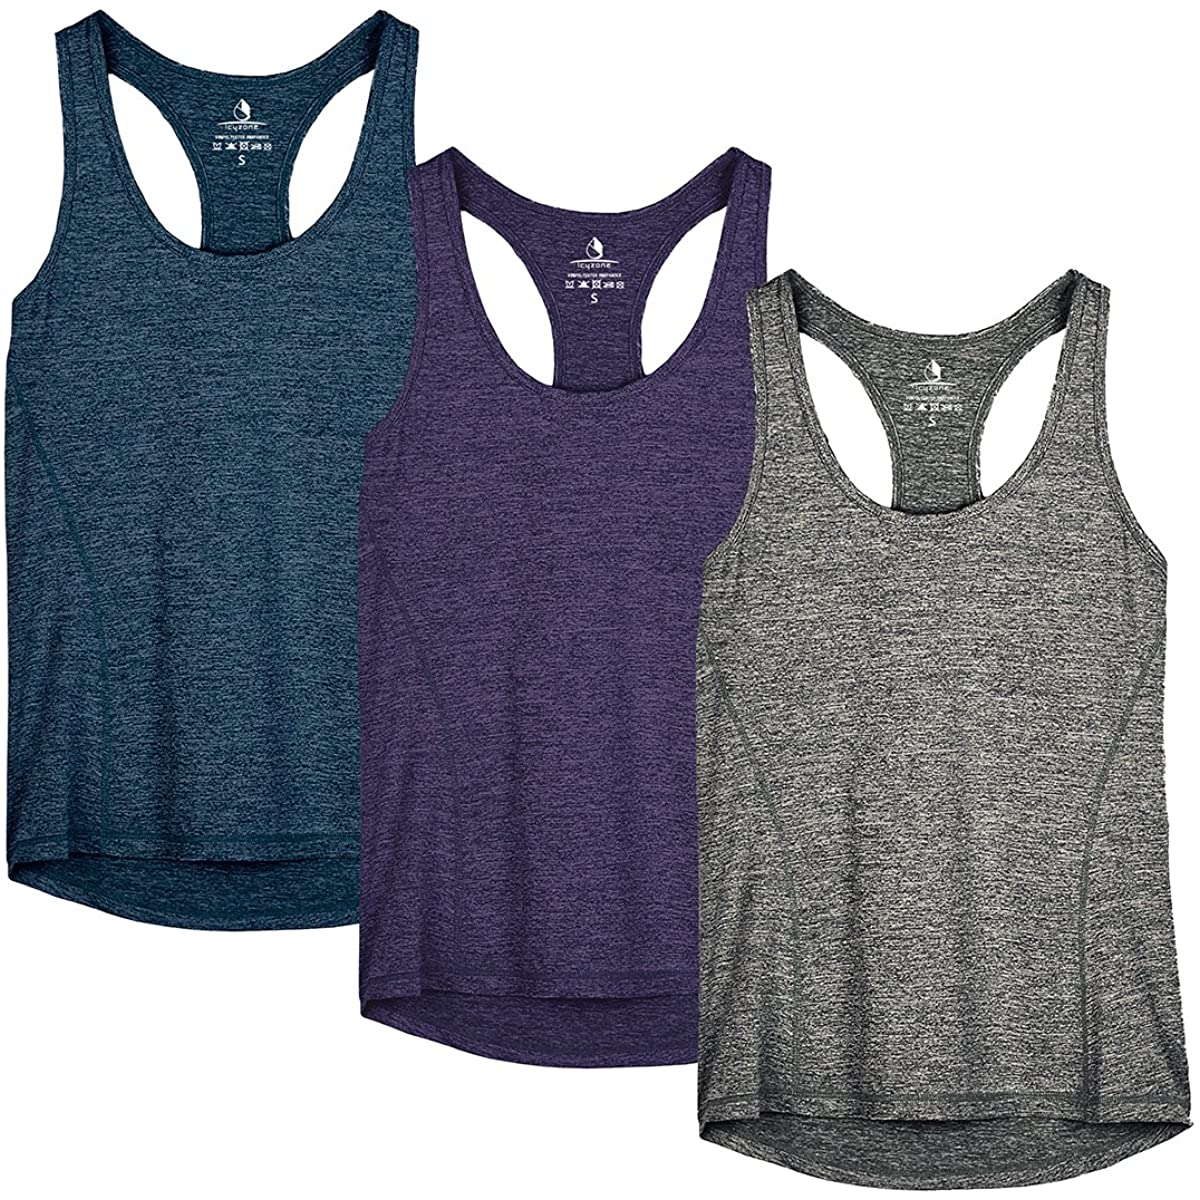 Womens Round Neck Active Icyzone Yoga Tops For Gym, Running, And